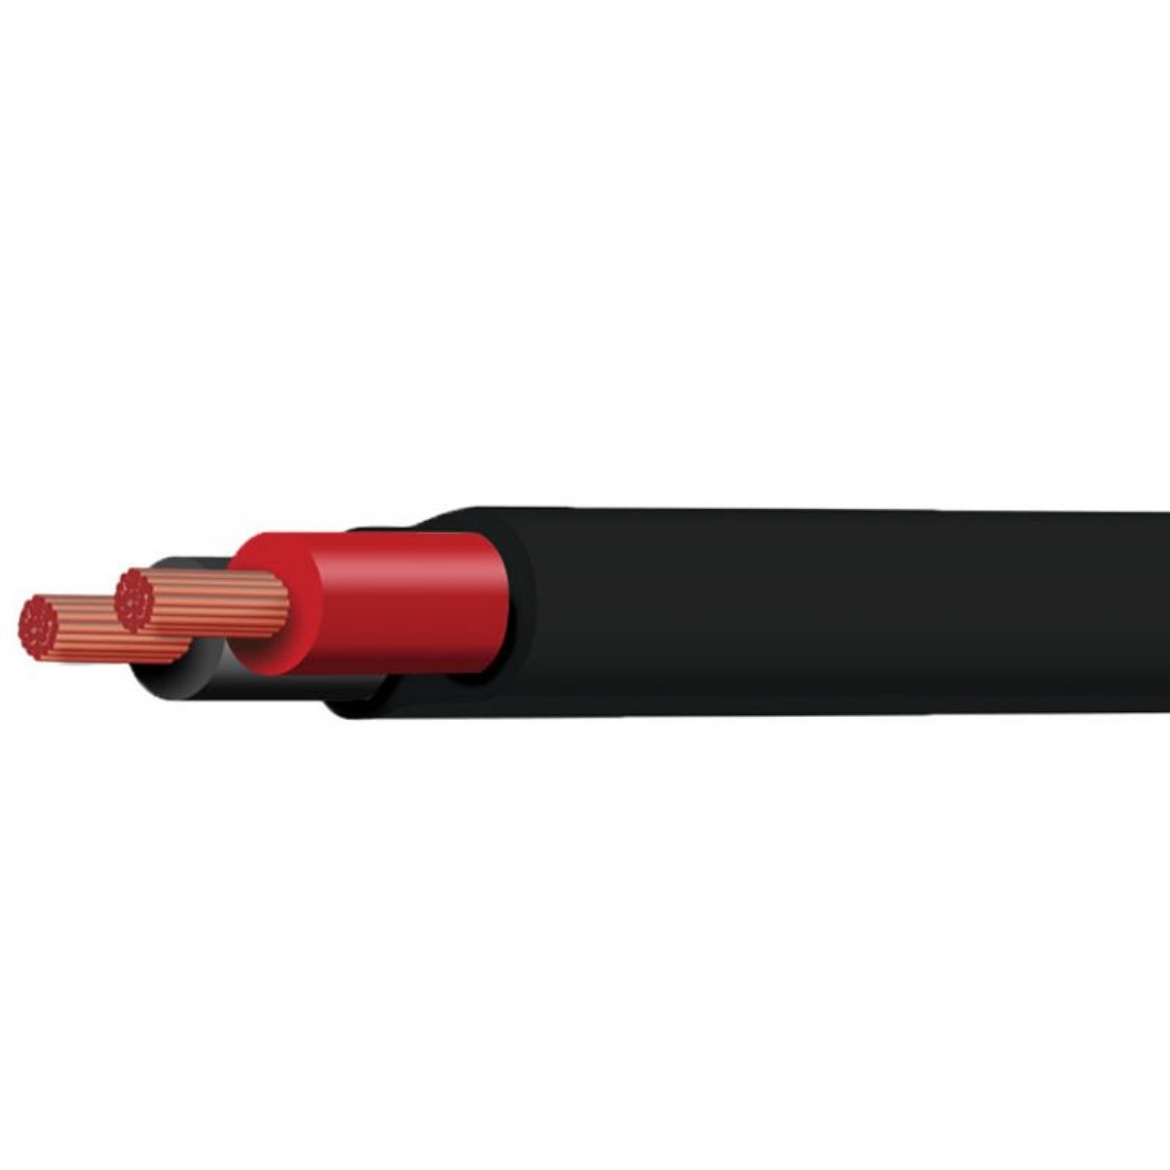 Picture of TYCAB 6MM TWIN CORE CABLE 38A TWIN SHEATH BLACK/RED - 100M ROLL